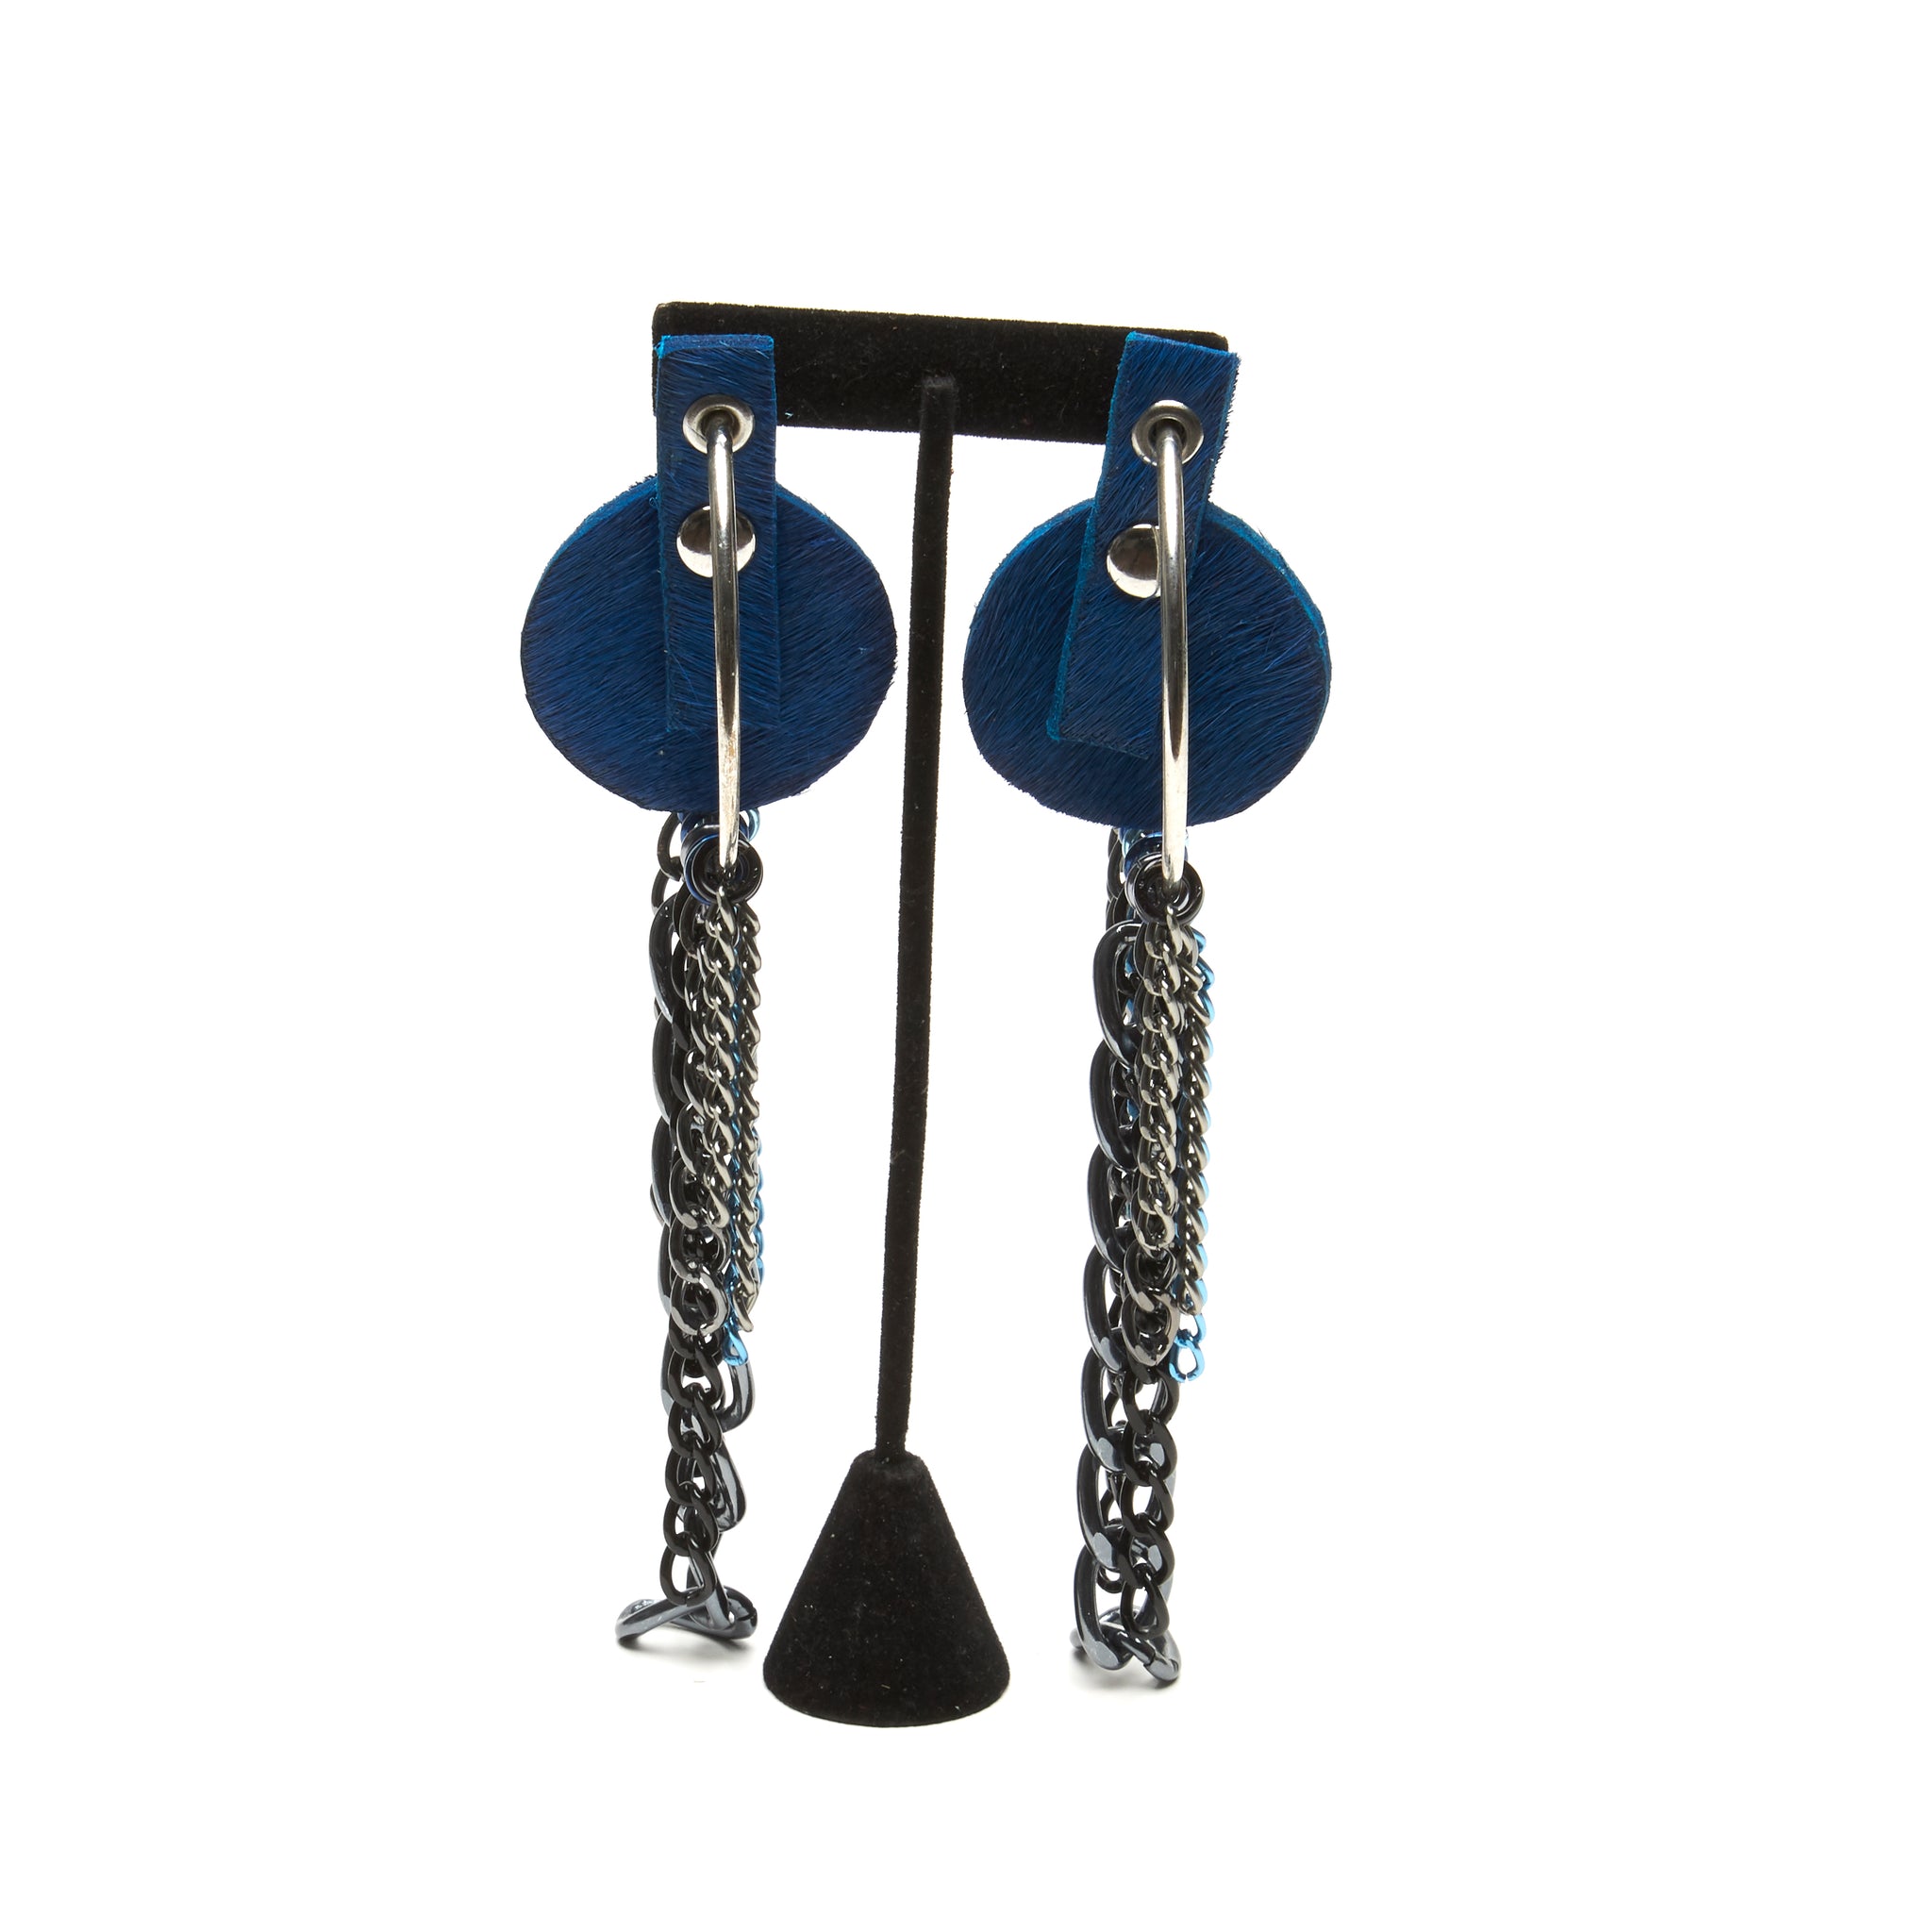 COBALT BLUE HAIR-ON COWHIDE DISC EARRINGS WITH CLUSTER OF CHAINS IN ASSORTED STYLES AND COLORS. by nyet jewelry.